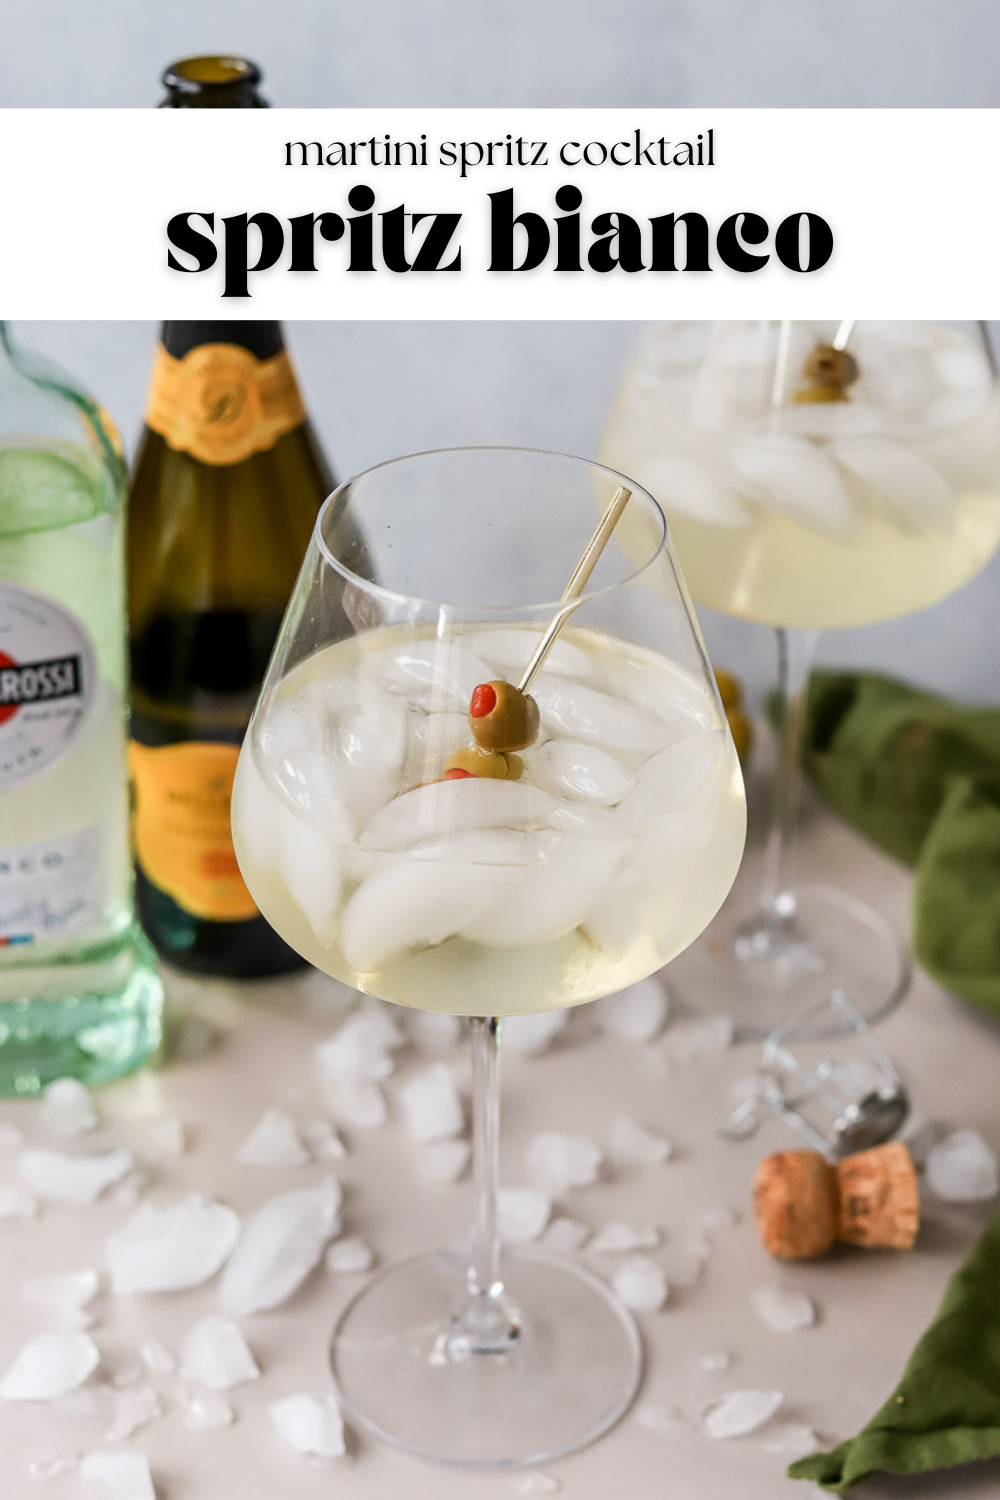 Spritz Bianco made with Bianco vermouth.